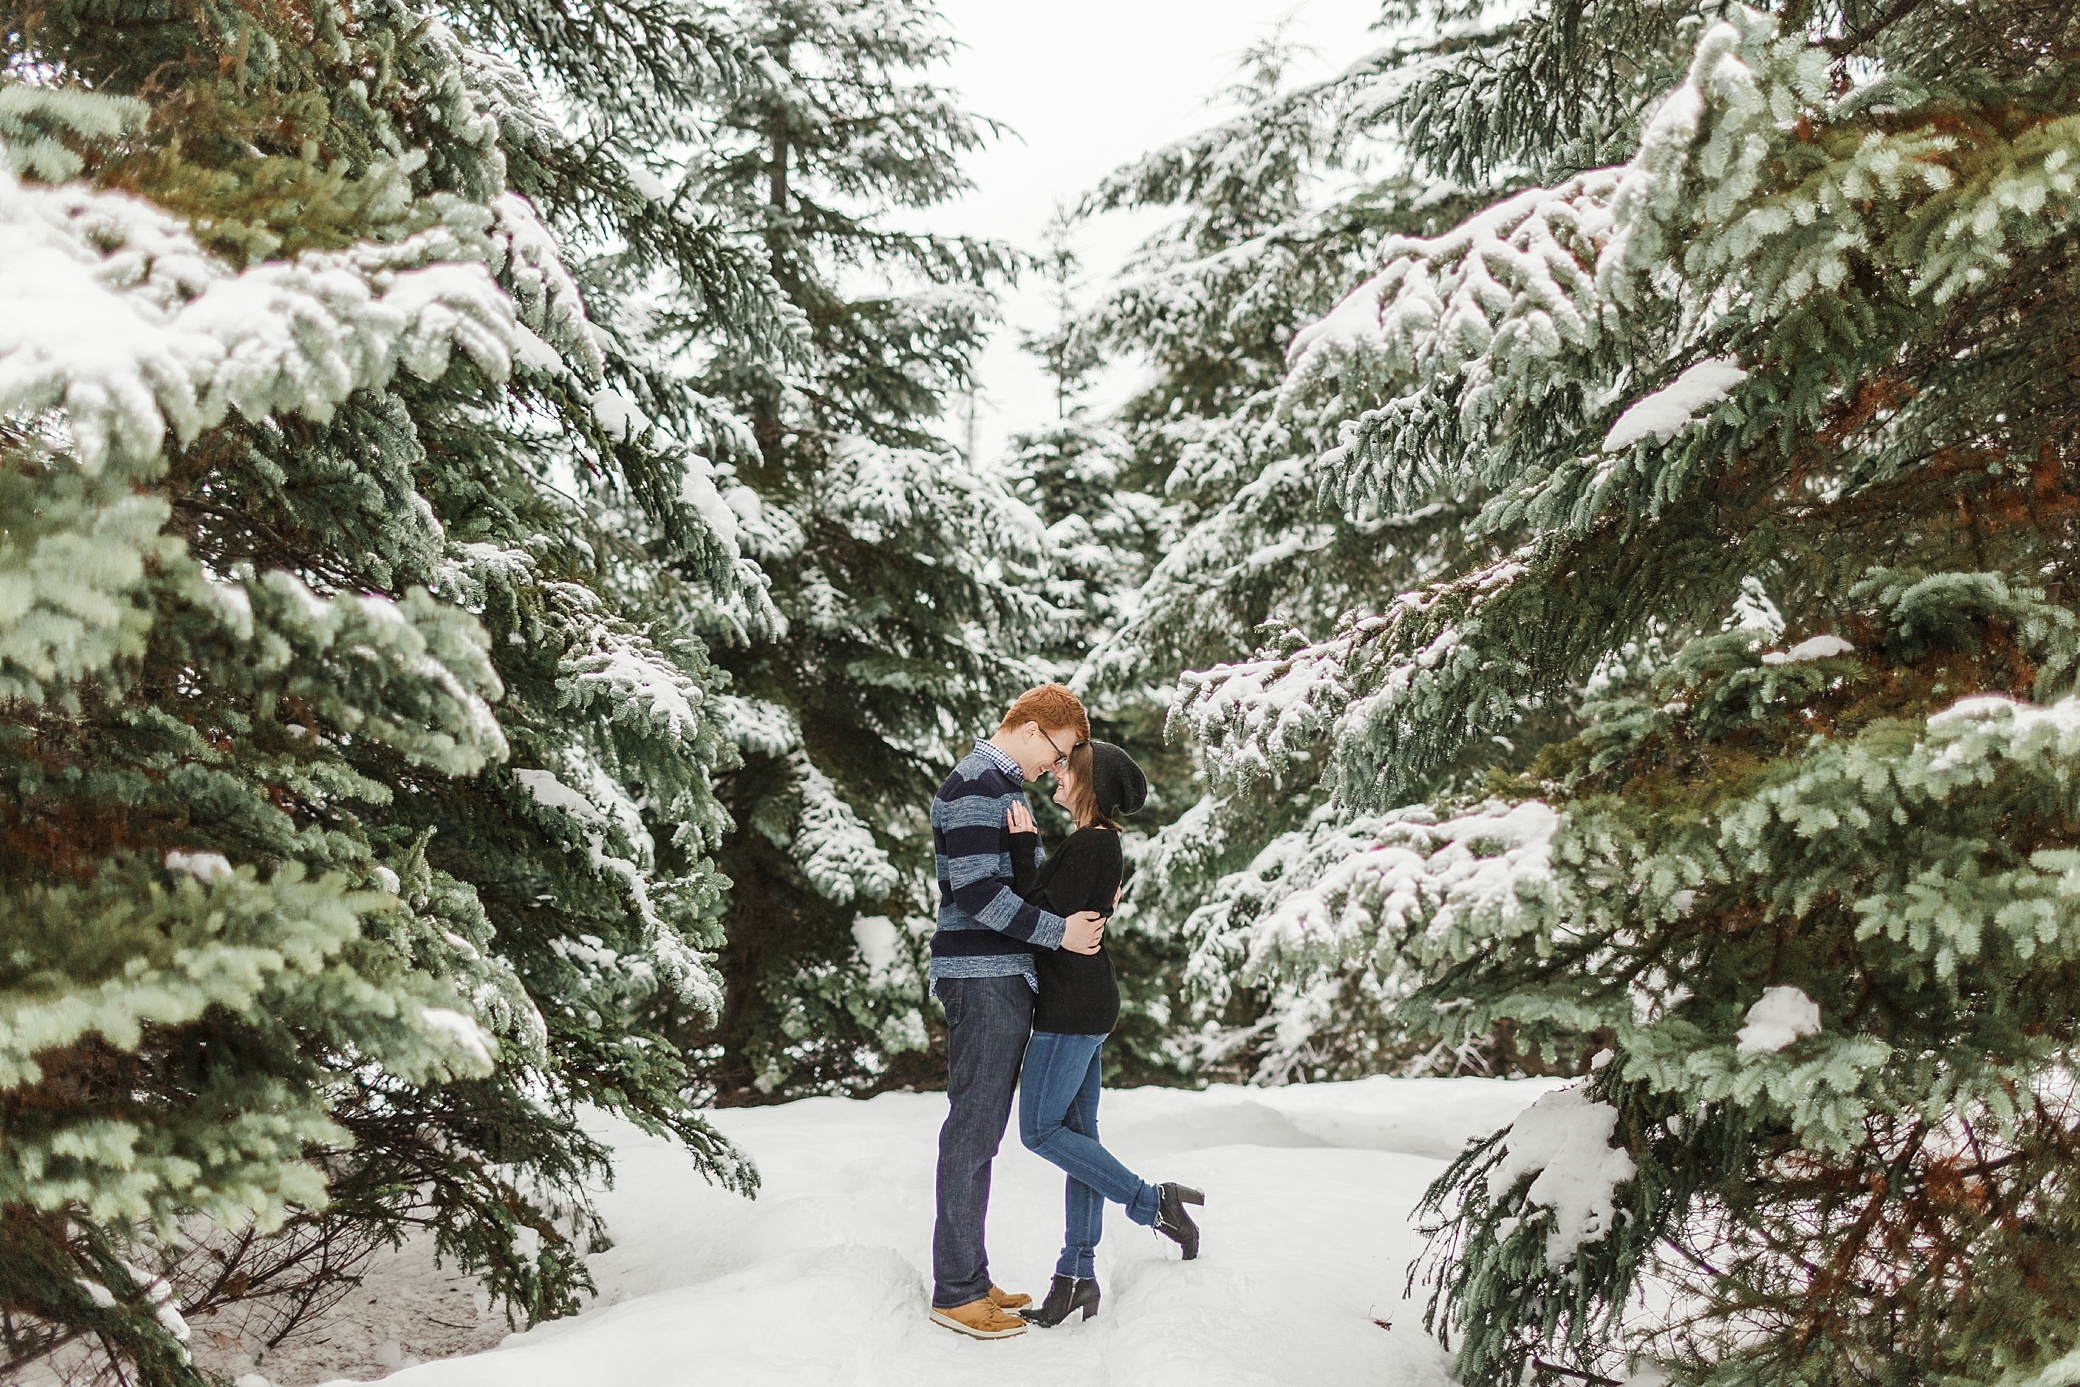 Couple surrounded by snowy trees at Snoqualmie | Megan Montalvo Photography